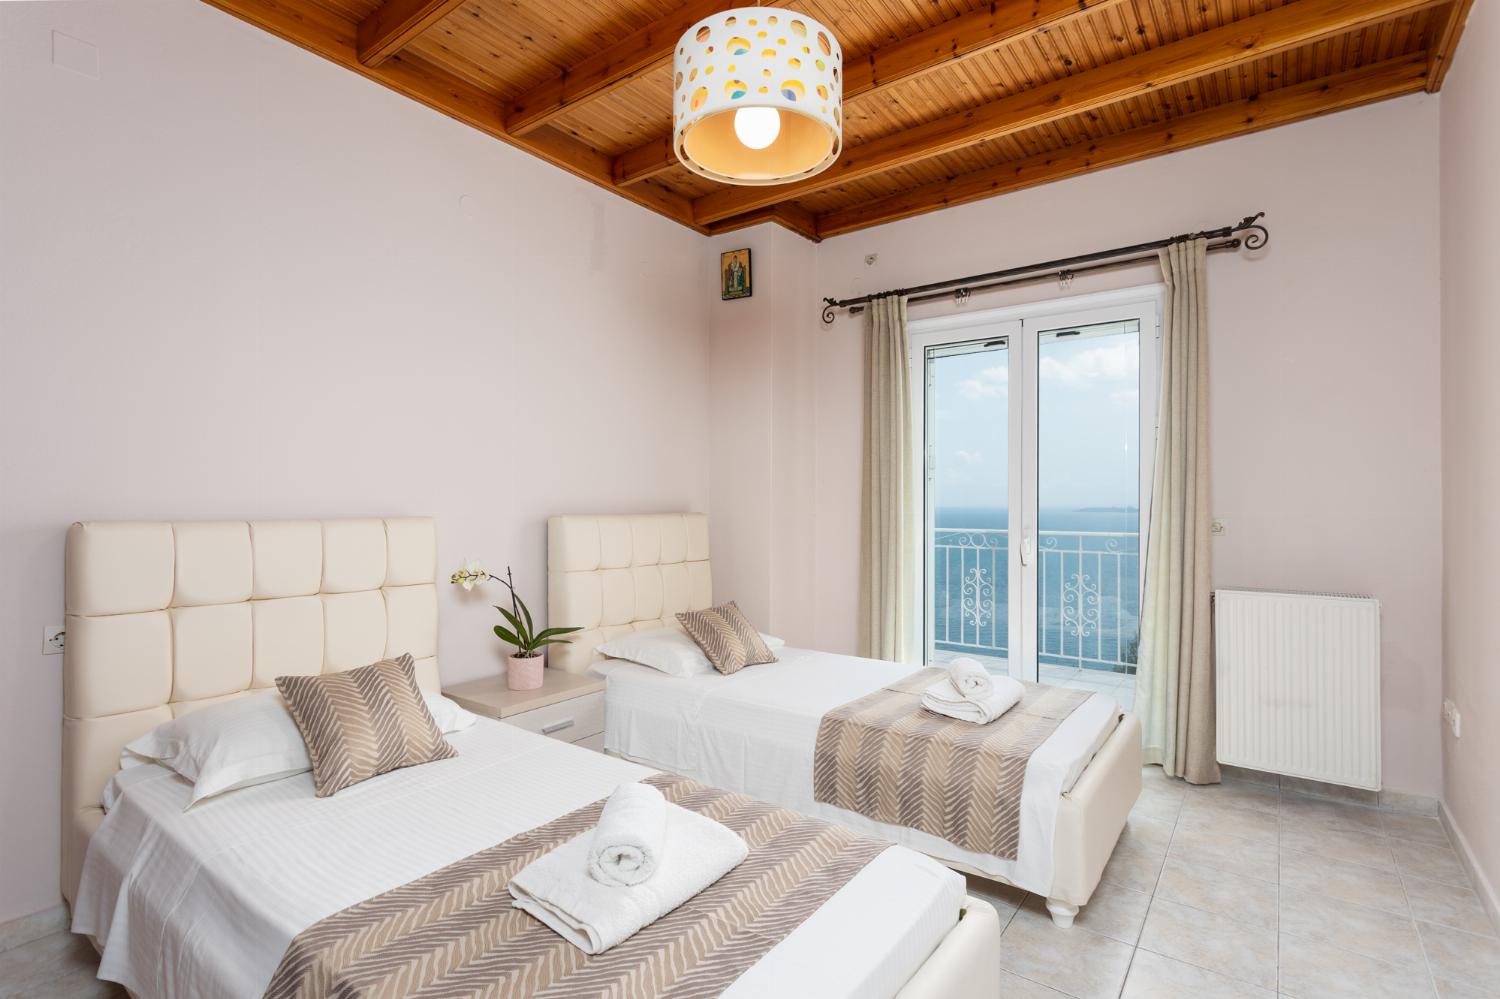 Twin bedroom on first floor with sea views and balcony access